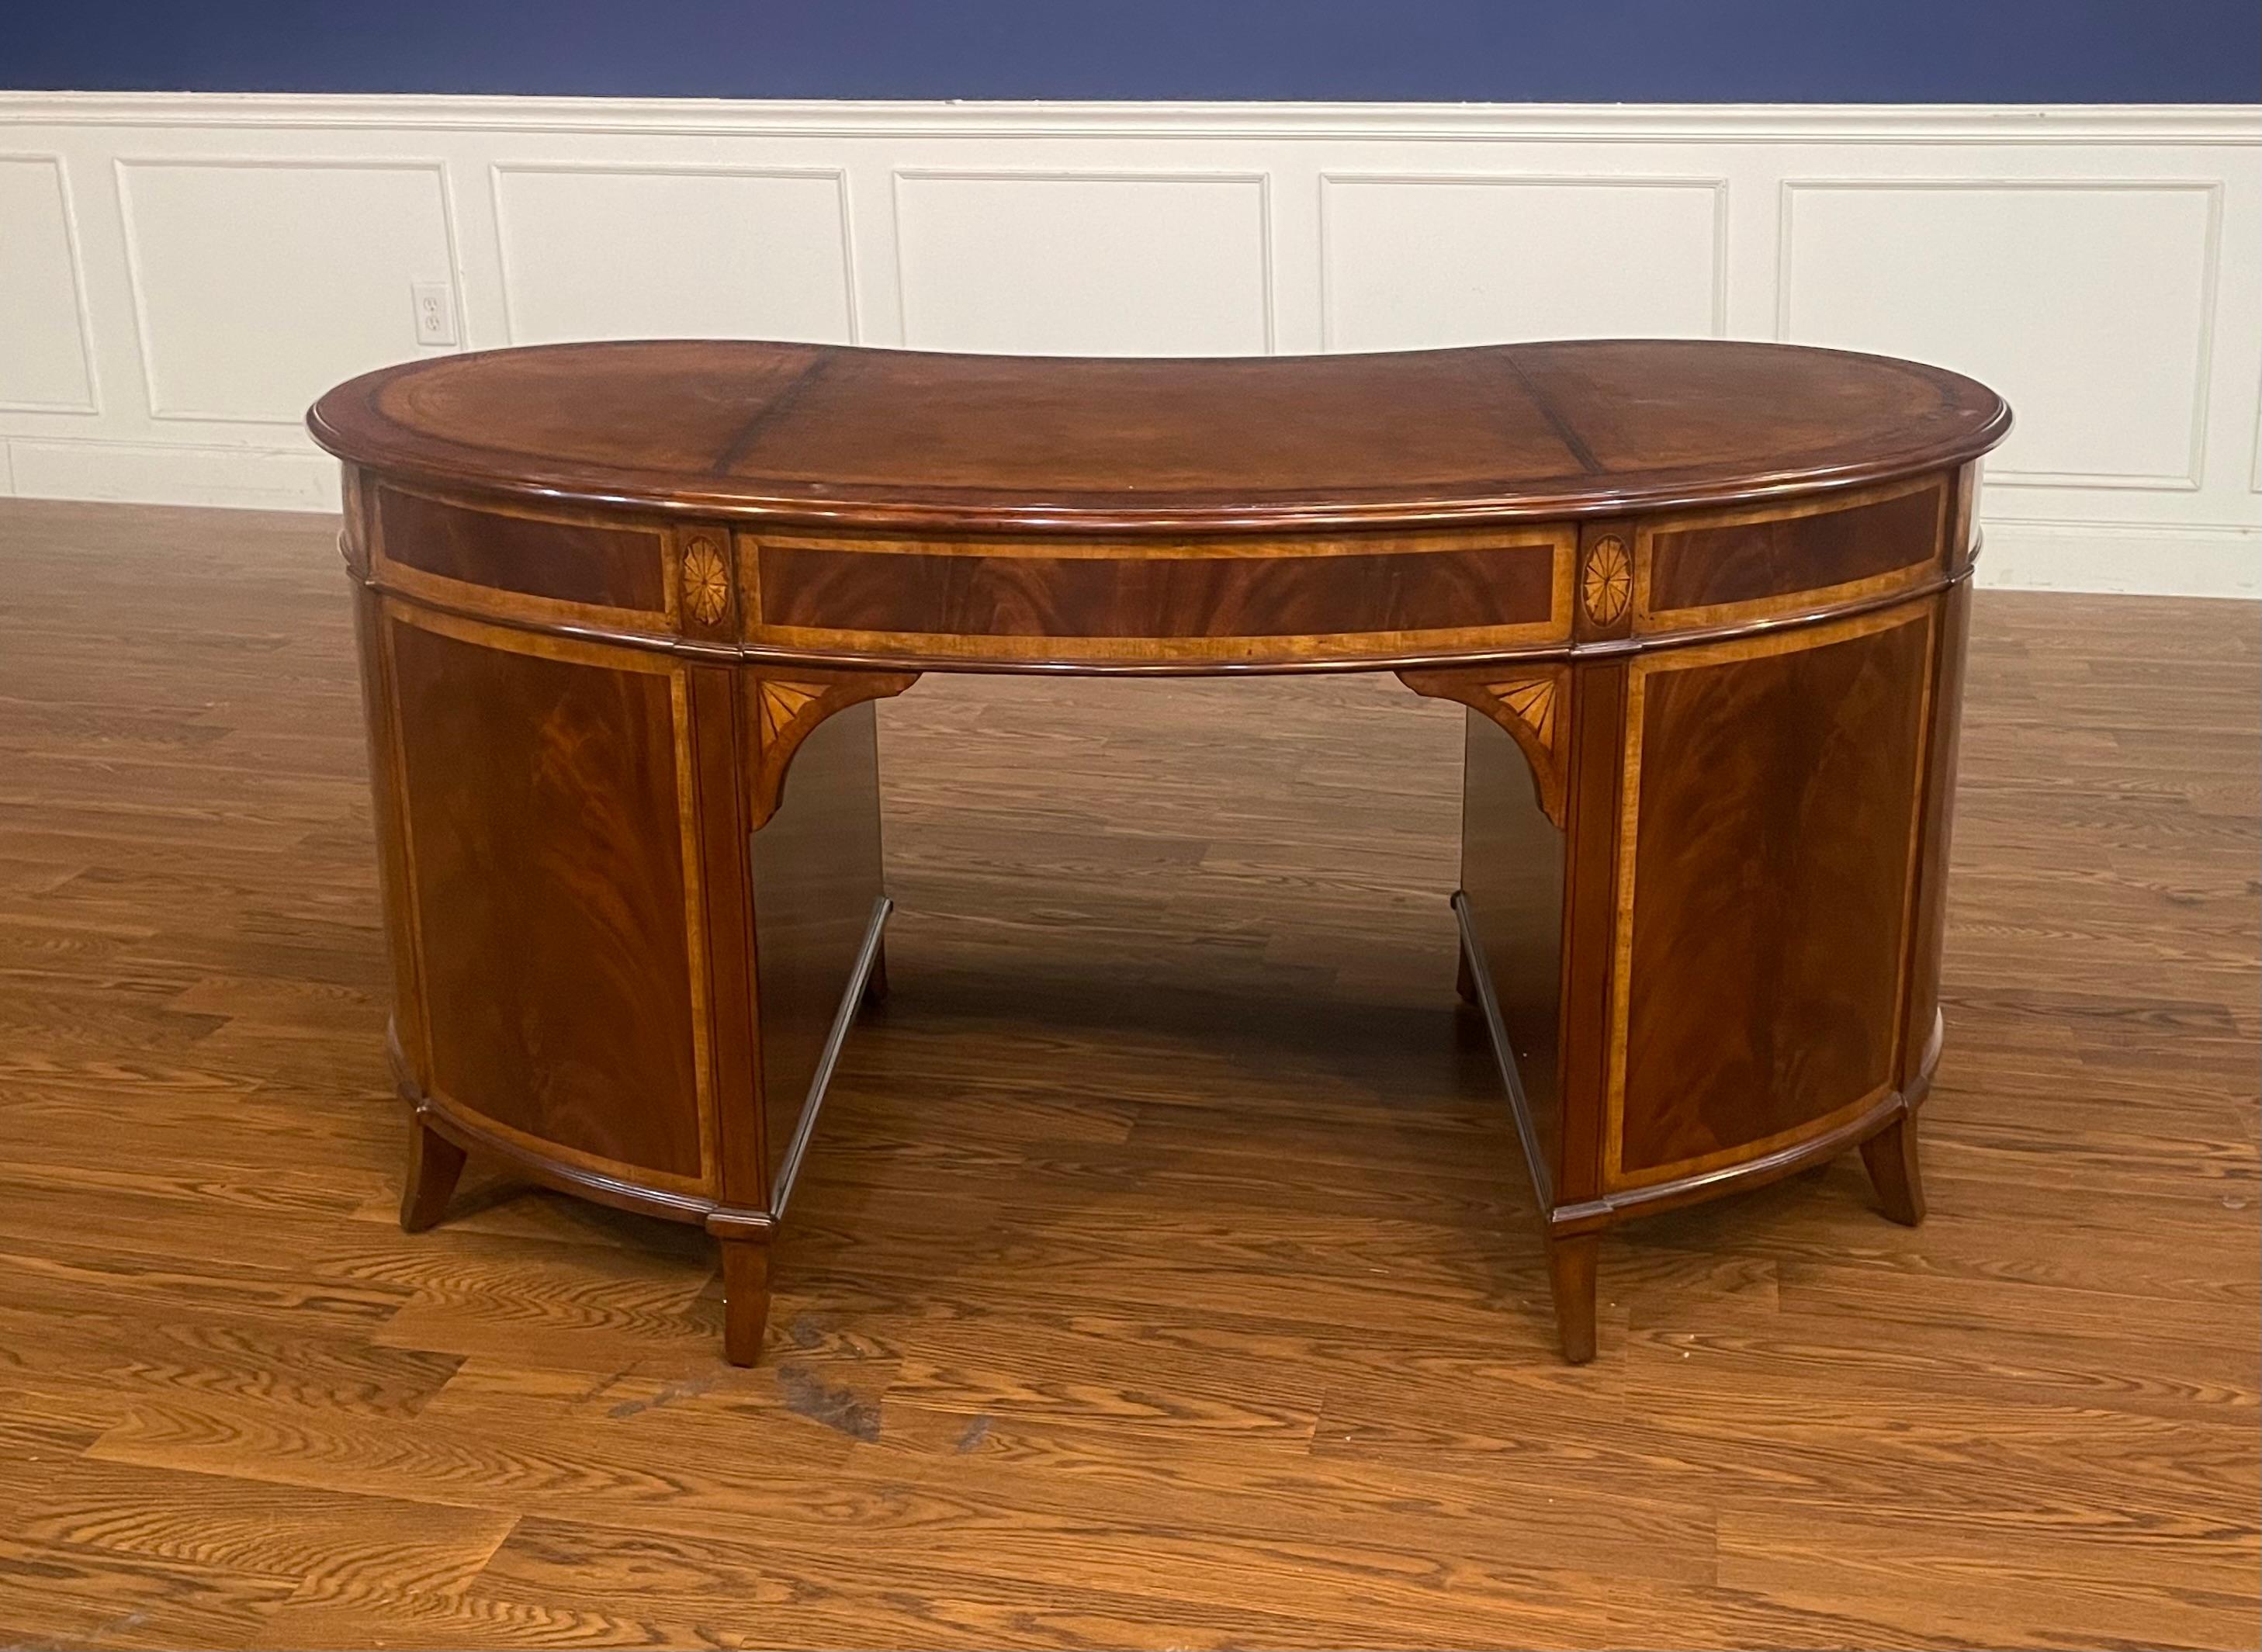 Mahogany Kidney Shaped Desk by Leighton Hall In New Condition For Sale In Suwanee, GA